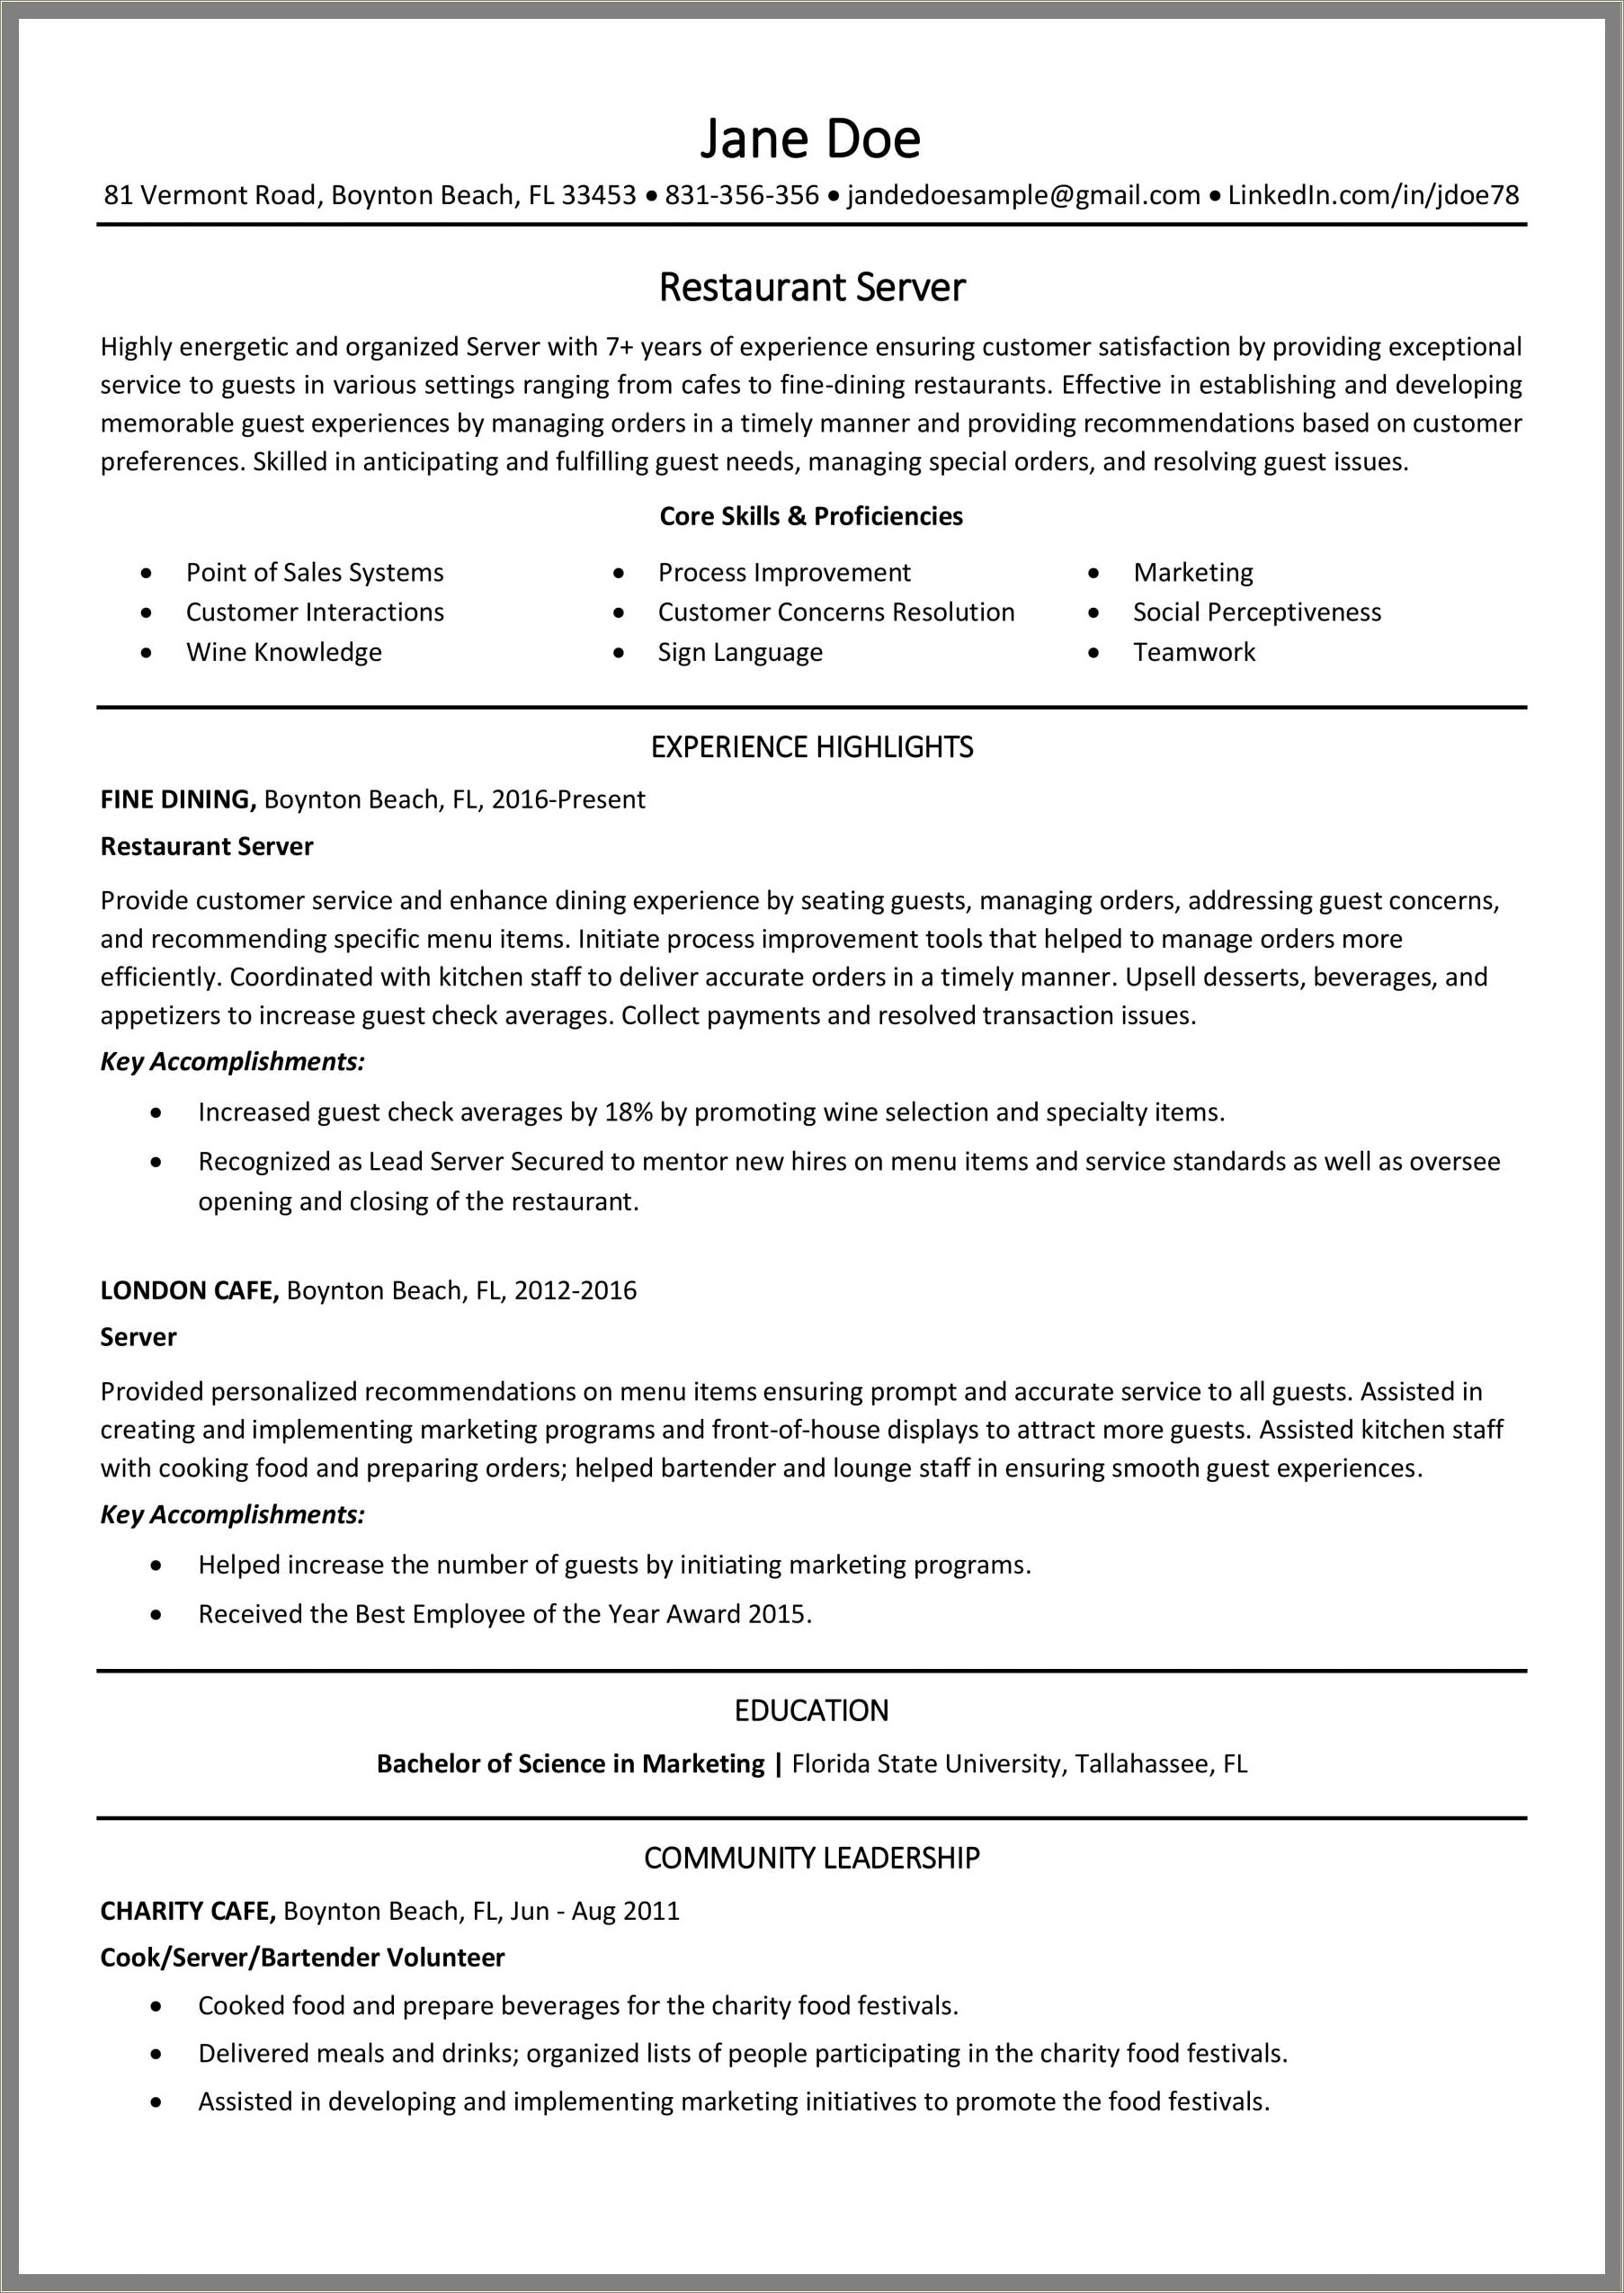 Listing Server Experience On A Resume